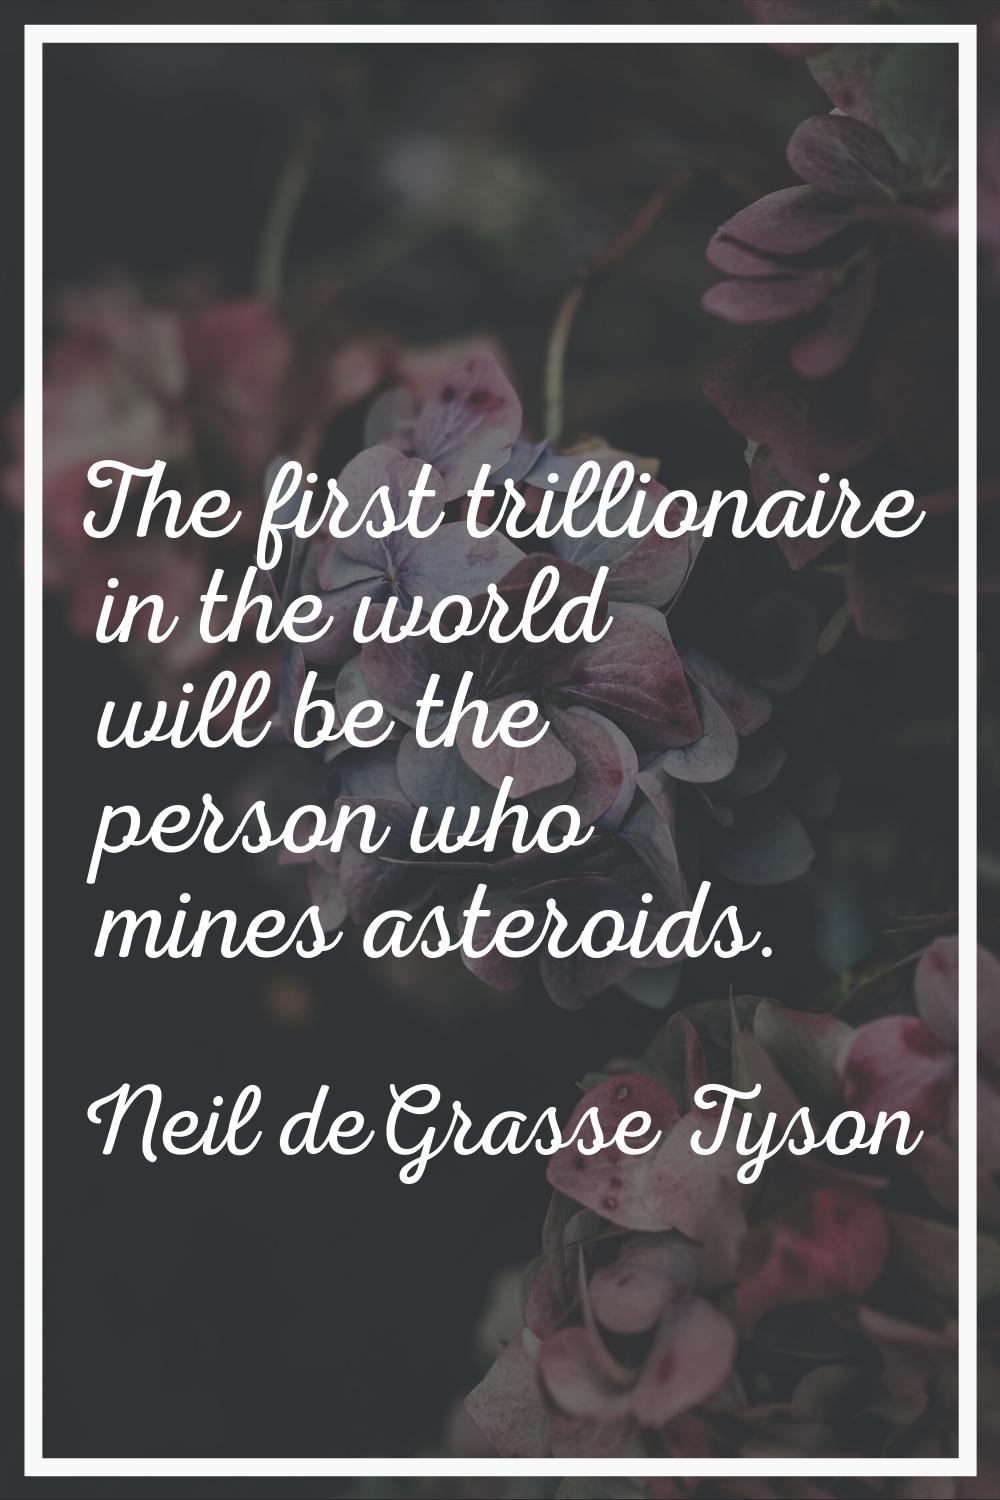 The first trillionaire in the world will be the person who mines asteroids.